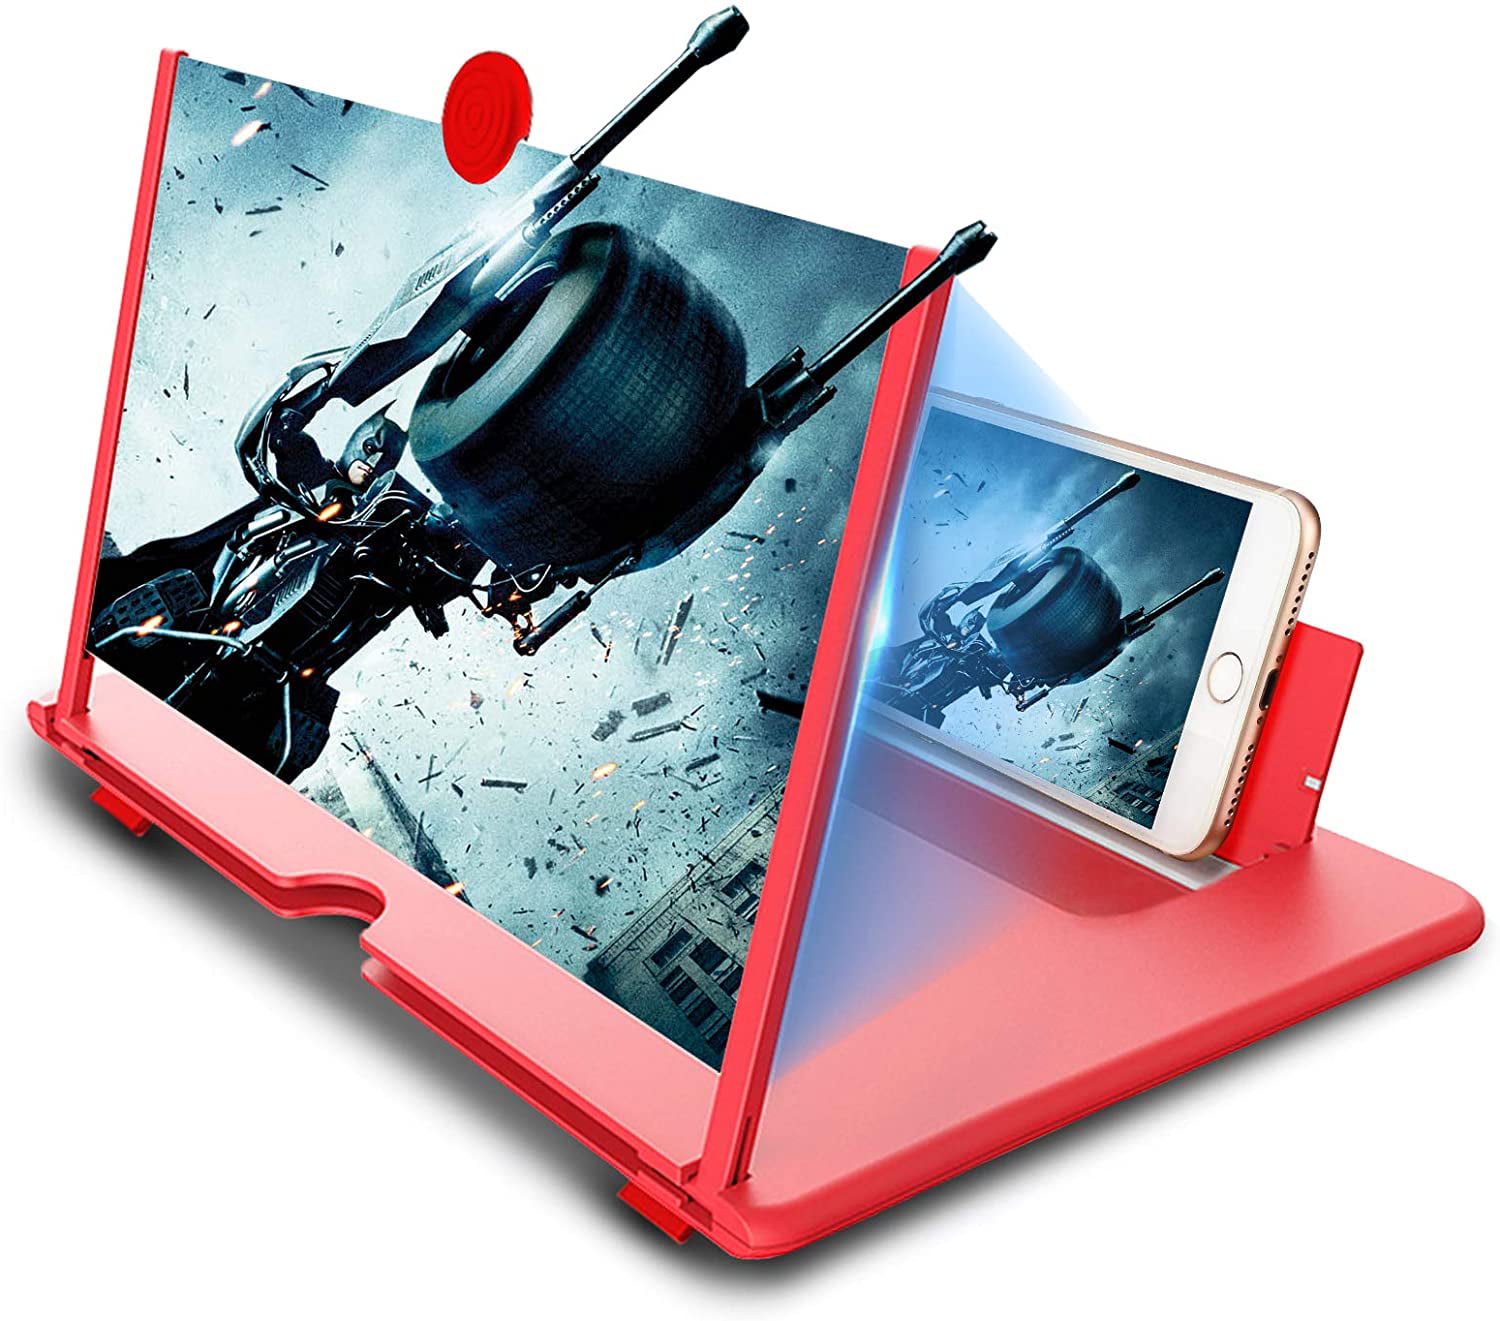 Red 10 inch Screen Magnifier-3D HD Cell Phone Screen Amplifier for Movies Videos Foldable Phone Stand with Screen Magnifier-Compatible with All Smartphones and Gaming 